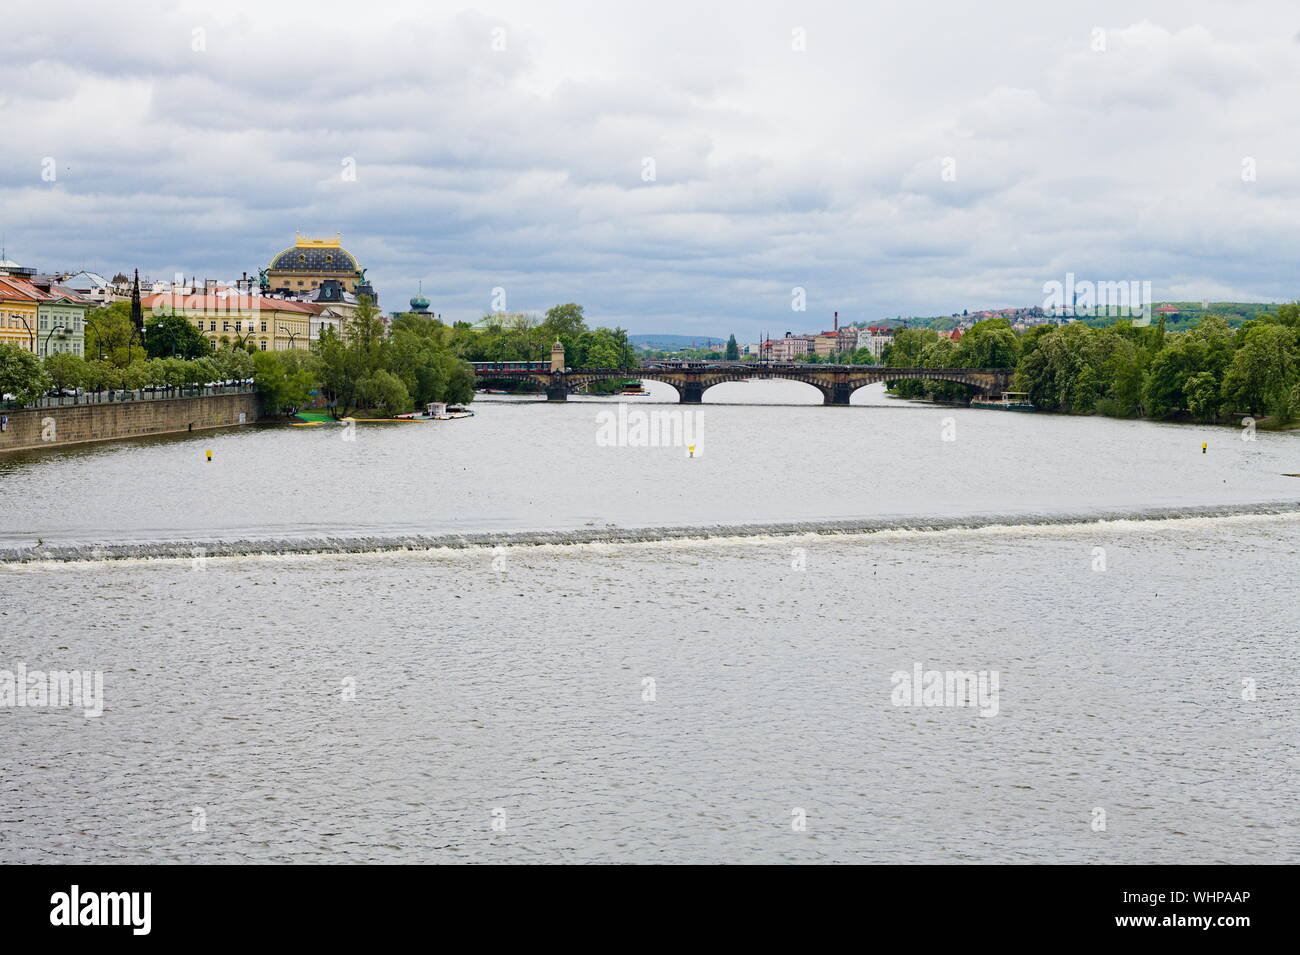 View of a low-head dam on the Vltava River with the Legion Bridge in the background, Prague, Czech Republic Stock Photo